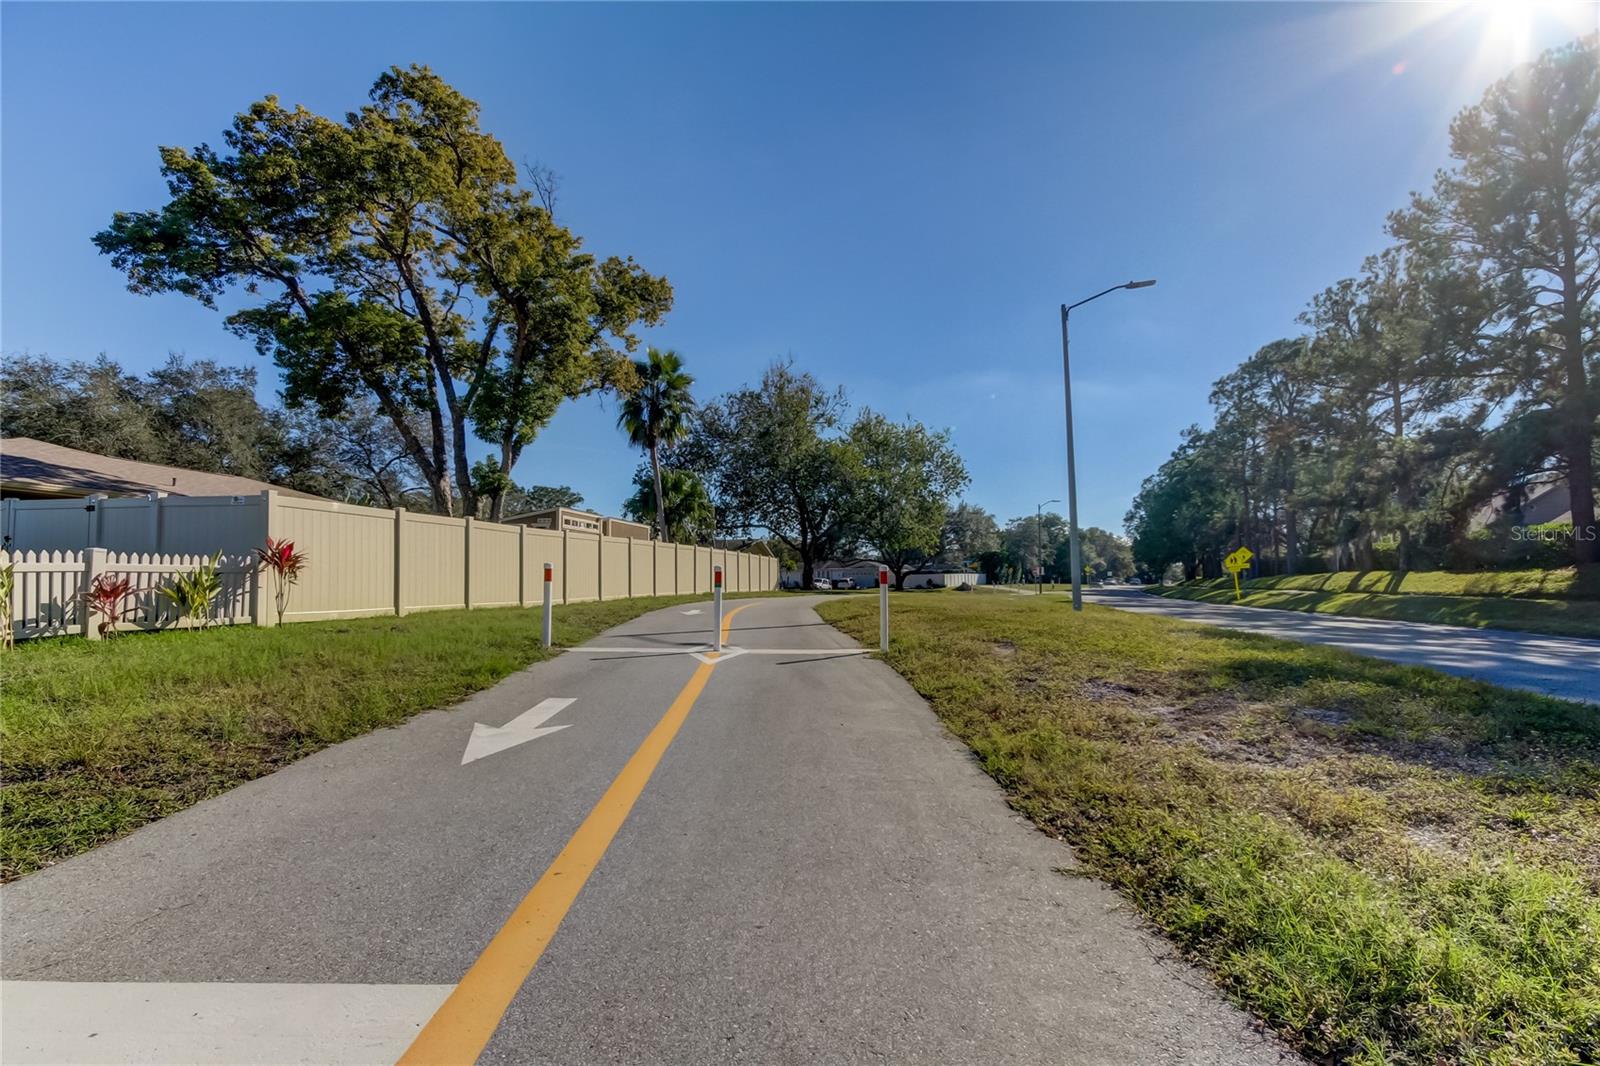 Pinellas Trail Extension Passes Right by This Community.. So Convenient.. Go for a Walk, Job, or BikeRide Anytime!